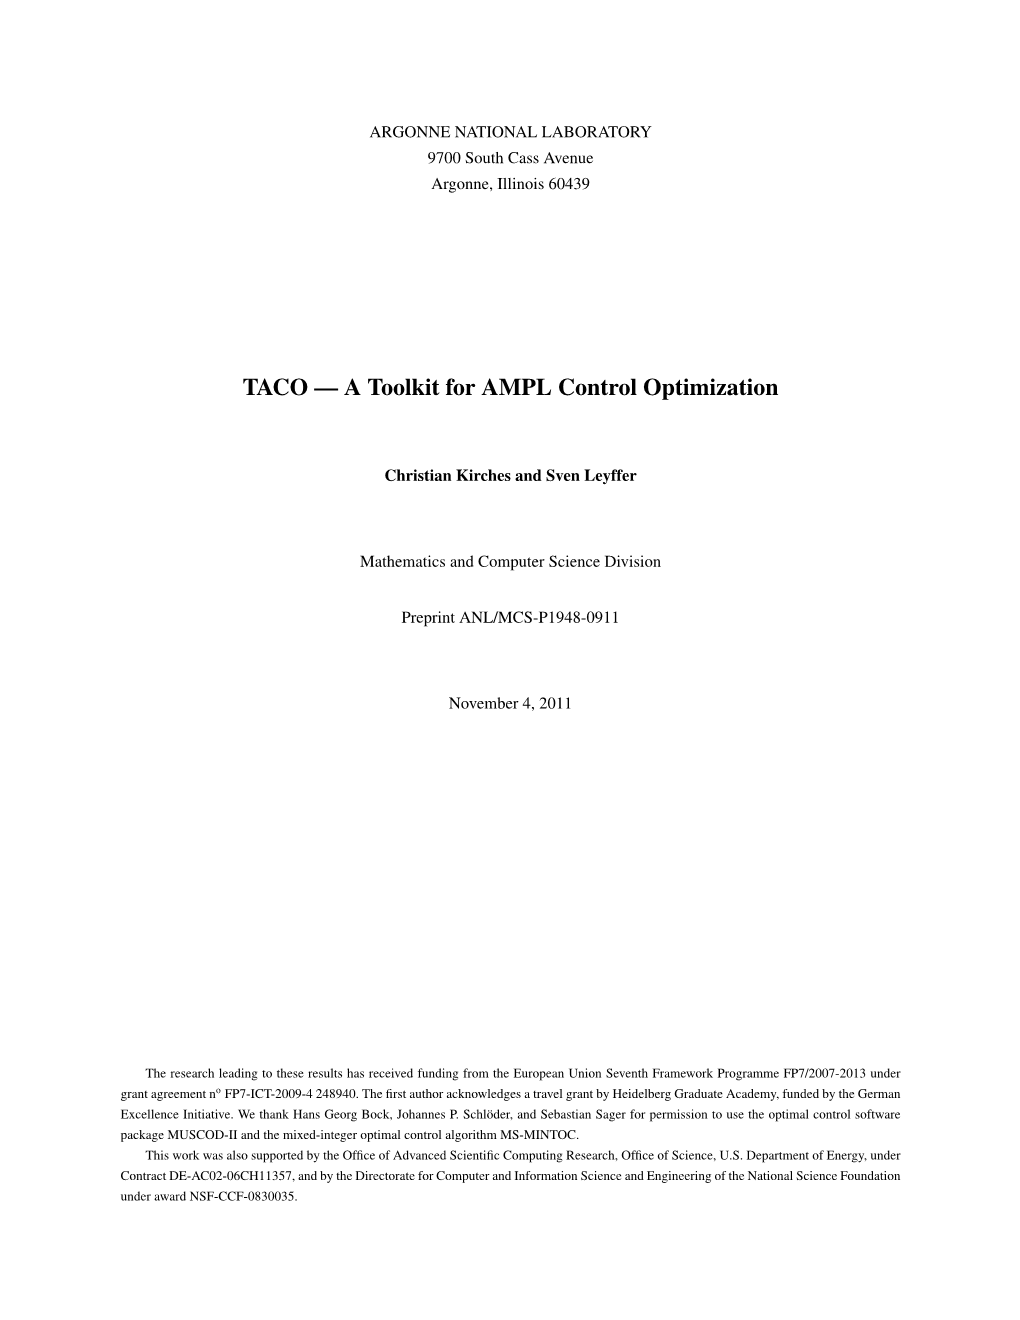 A Toolkit for AMPL Control Optimization